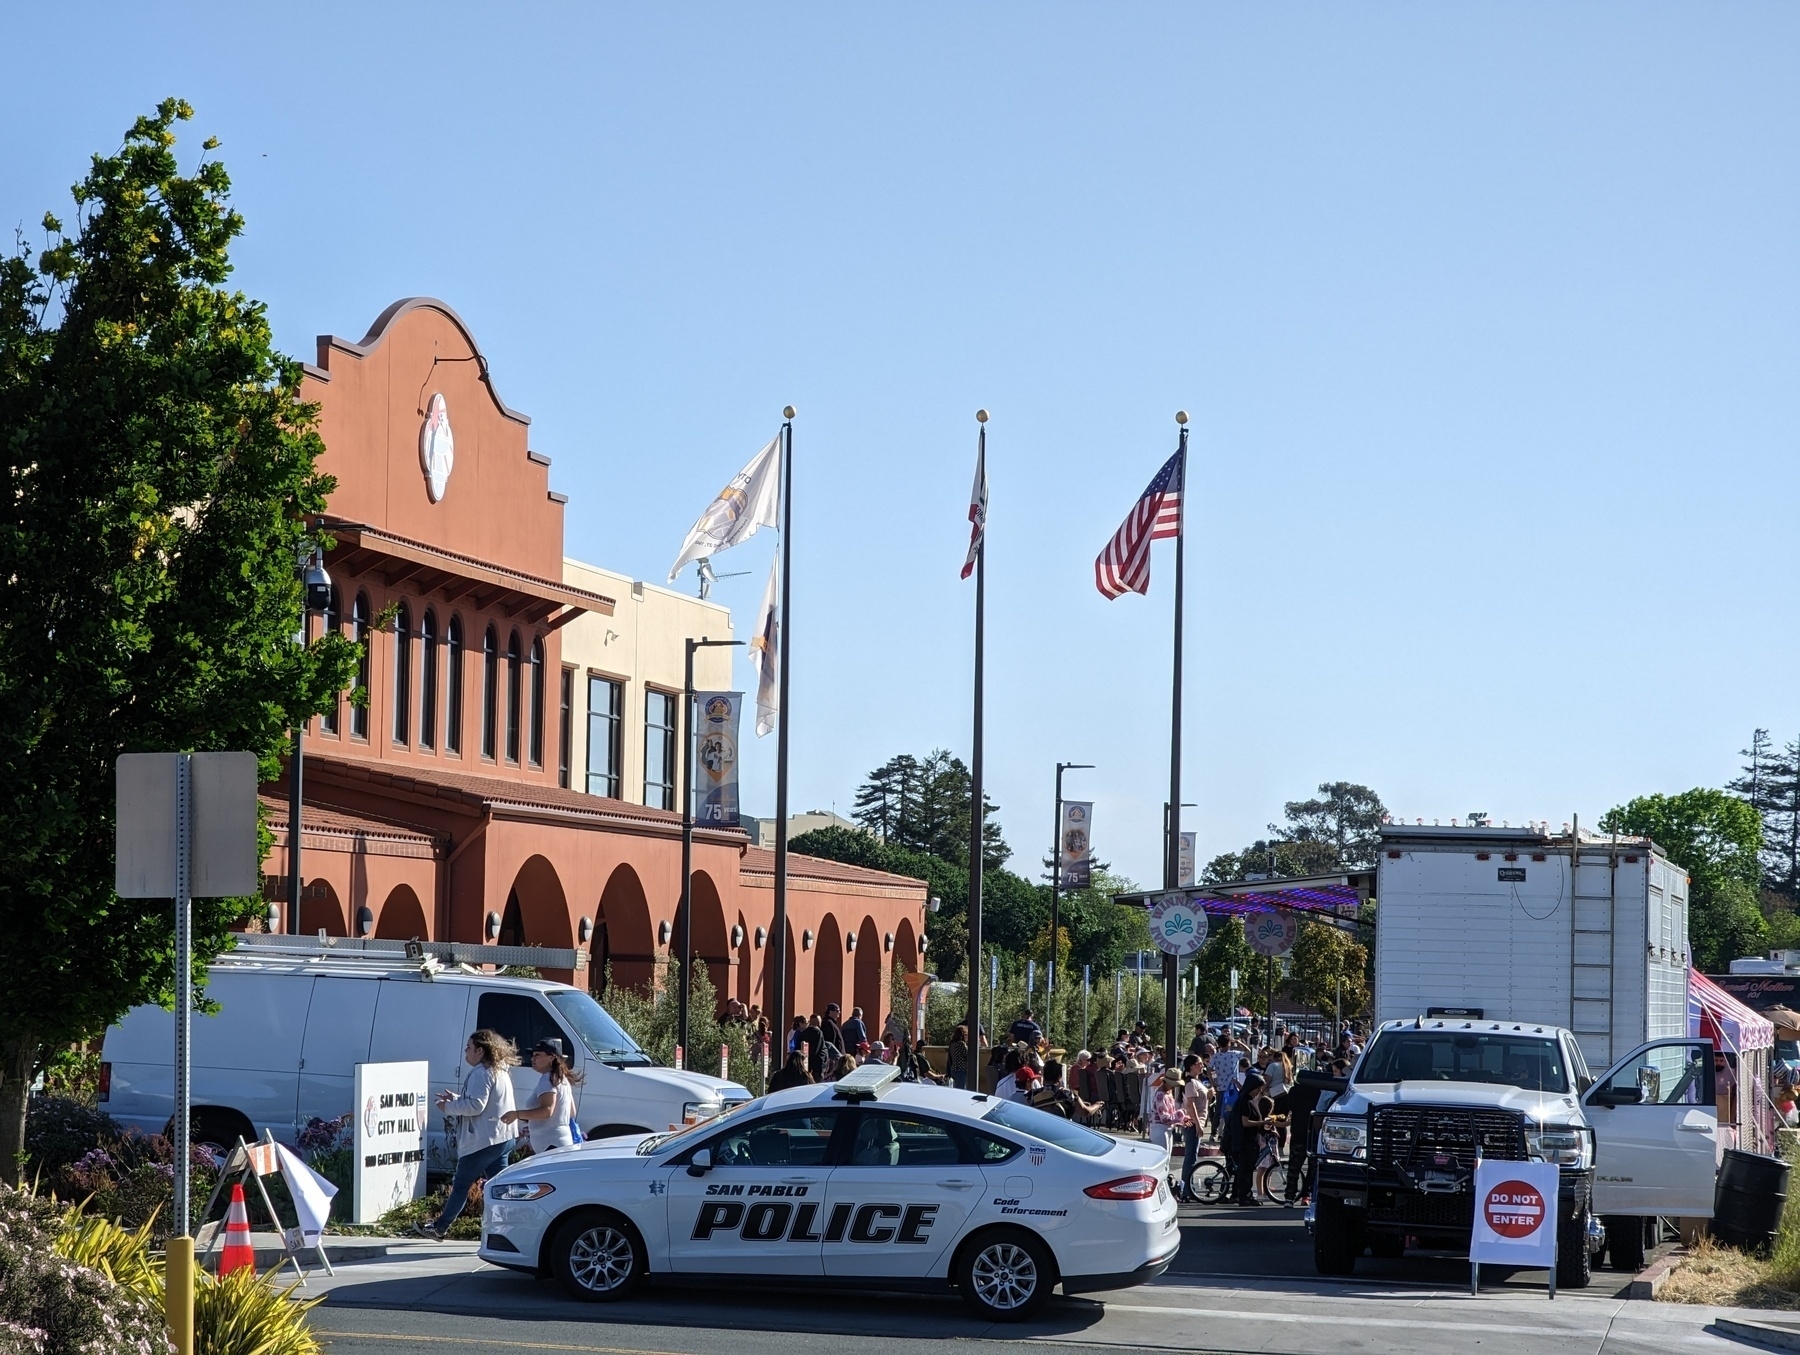 A white San Pablo Police Department patrol vehicle blocks off the entrance to the long driveway Thursday, April 27th 2023 at the 75th anniversary celebration outside City Hall in San Pablo, California. Above a small crowd enjoying food trucks and lowrider classic cars, three flag poles show the American, state and city flags against clear pale blue afternoon sky.